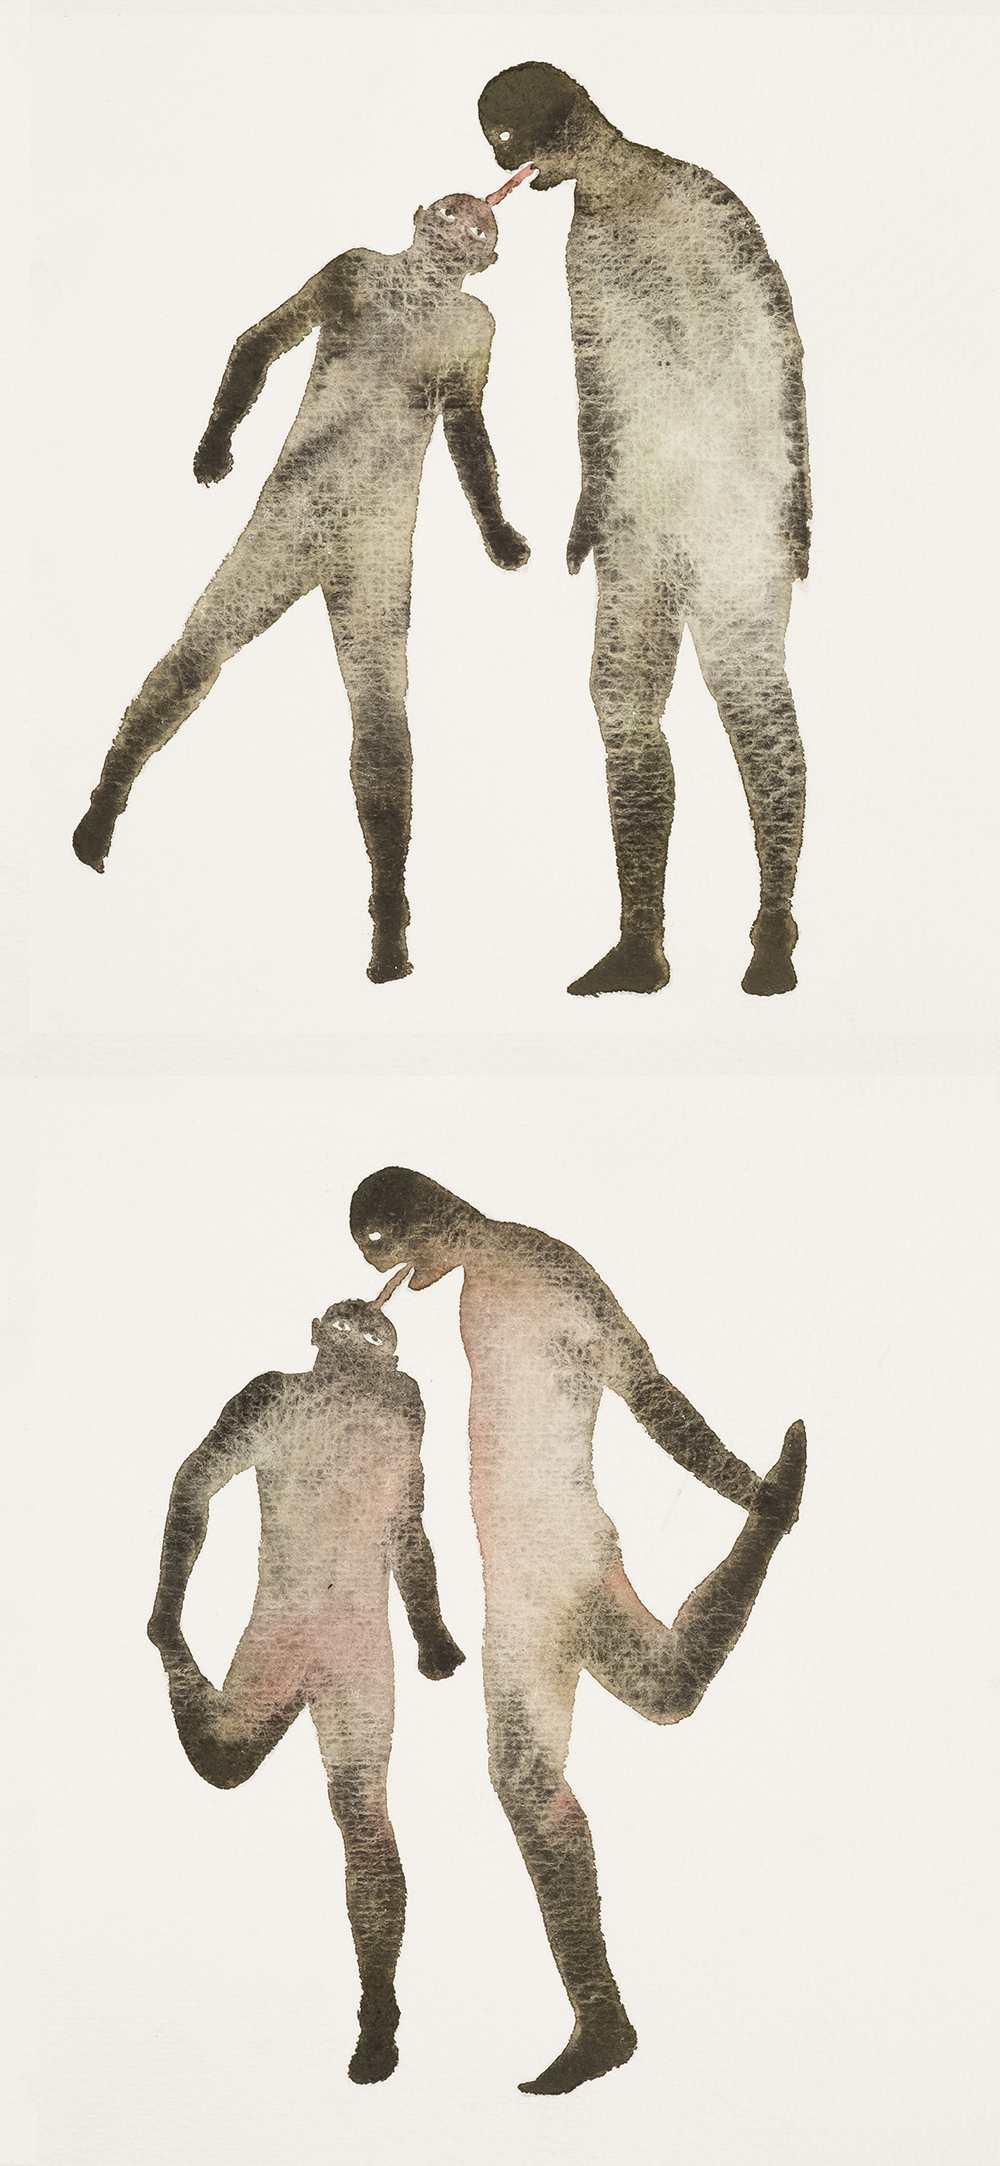 4. Maryam Mohry, Relation, water color on paper, diptych, 20×19 cm each, 40×19 cm overall, 2021